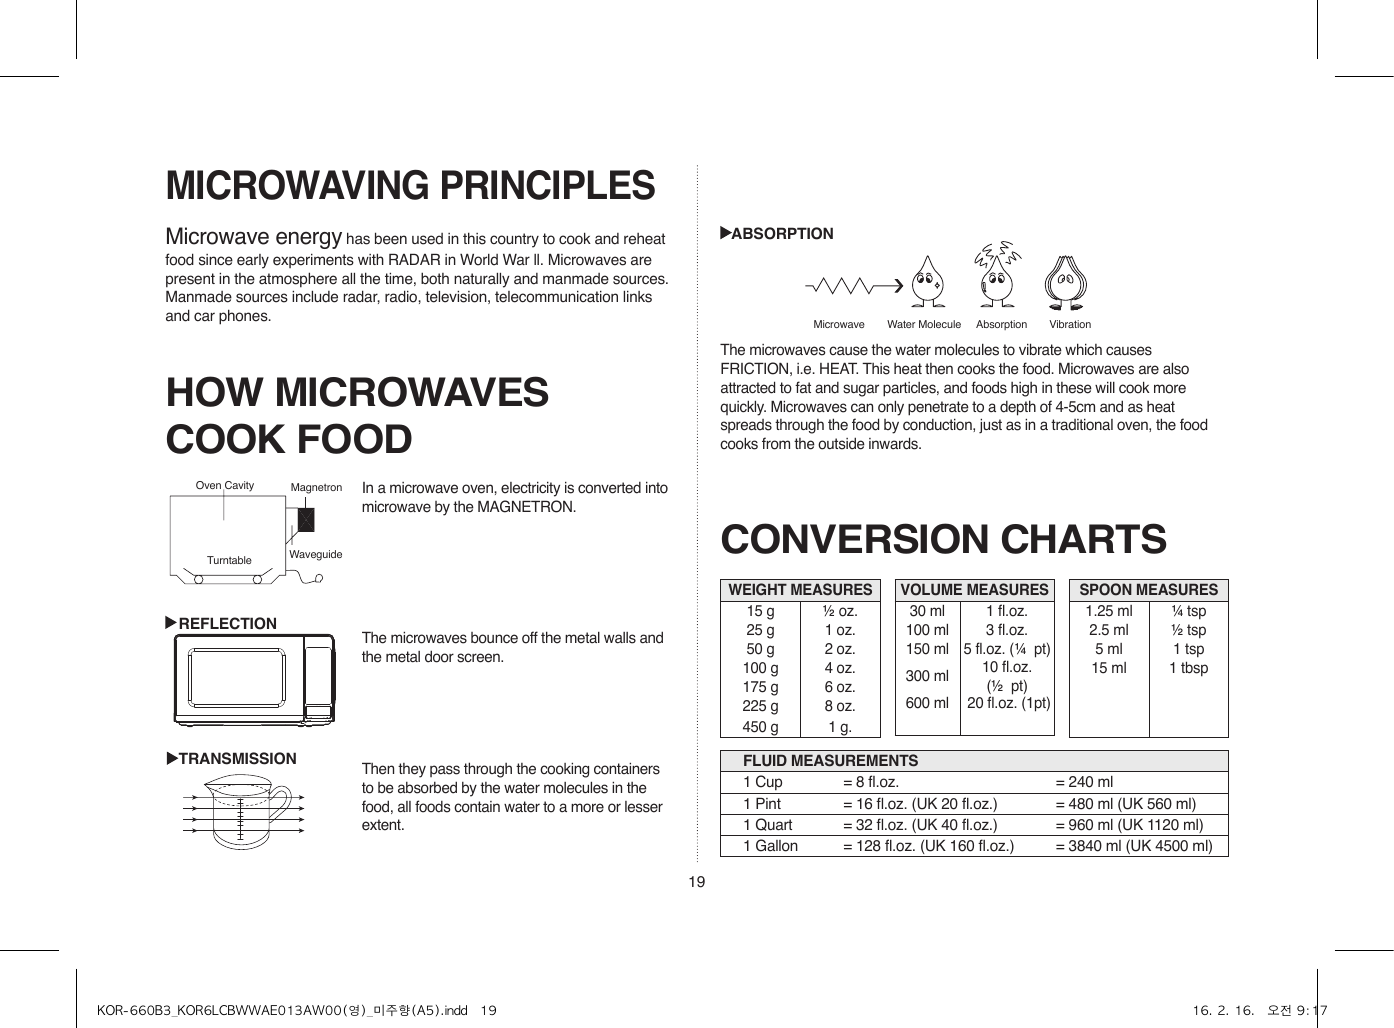 19MICROWAVING PRINCIPLESMicrowave energy has been used in this country to cook and reheat food since early experiments with RADAR in World War ll. Microwaves are present in the atmosphere all the time, both naturally and manmade sources. Manmade sources include radar, radio, television, telecommunication links and car phones.CONVERSION CHARTSHOW MICROWAVES COOK FOODThe microwaves cause the water molecules to vibrate which causes FRICTION, i.e. HEAT. This heat then cooks the food. Microwaves are also attracted to fat and sugar particles, and foods high in these will cook more quickly. Microwaves can only penetrate to a depth of 4-5cm and as heat spreads through the food by conduction, just as in a traditional oven, the food cooks from the outside inwards.In a microwave oven, electricity is converted into microwave by the MAGNETRON.The microwaves bounce off the metal walls and the metal door screen.Then they pass through the cooking containers to be absorbed by the water molecules in the food, all foods contain water to a more or lesser extent.Oven Cavity MagnetronWaveguideTurntableREFLECTIONTRANSMISSIONABSORPTIONMicrowave  Water Molecule  Absorption  VibrationWEIGHT MEASURES15 g ½ oz.25 g 1 oz.50 g 2 oz.100 g 4 oz.175 g 6 oz.225 g 8 oz.450 g 1 g.FLUID MEASUREMENTS1 Cup = 8 fl.oz. = 240 ml1 Pint = 16 fl.oz. (UK 20 fl.oz.) = 480 ml (UK 560 ml)1 Quart = 32 fl.oz. (UK 40 fl.oz.) = 960 ml (UK 1120 ml)1 Gallon = 128 fl.oz. (UK 160 fl.oz.) = 3840 ml (UK 4500 ml)VOLUME MEASURES30 ml 1 fl.oz.100 ml 3 fl.oz.150 ml 5 fl.oz. (¼  pt)300 ml 10 fl.oz.(½  pt)600 ml  20 fl.oz. (1pt)SPOON MEASURES1.25 ml ¼ tsp2.5 ml ½ tsp5 ml 1 tsp15 ml 1 tbspKOR-660B3_KOR6LCBWWAE013AW00(영)_미주향(A5).indd   19 16. 2. 16.   오전 9:17